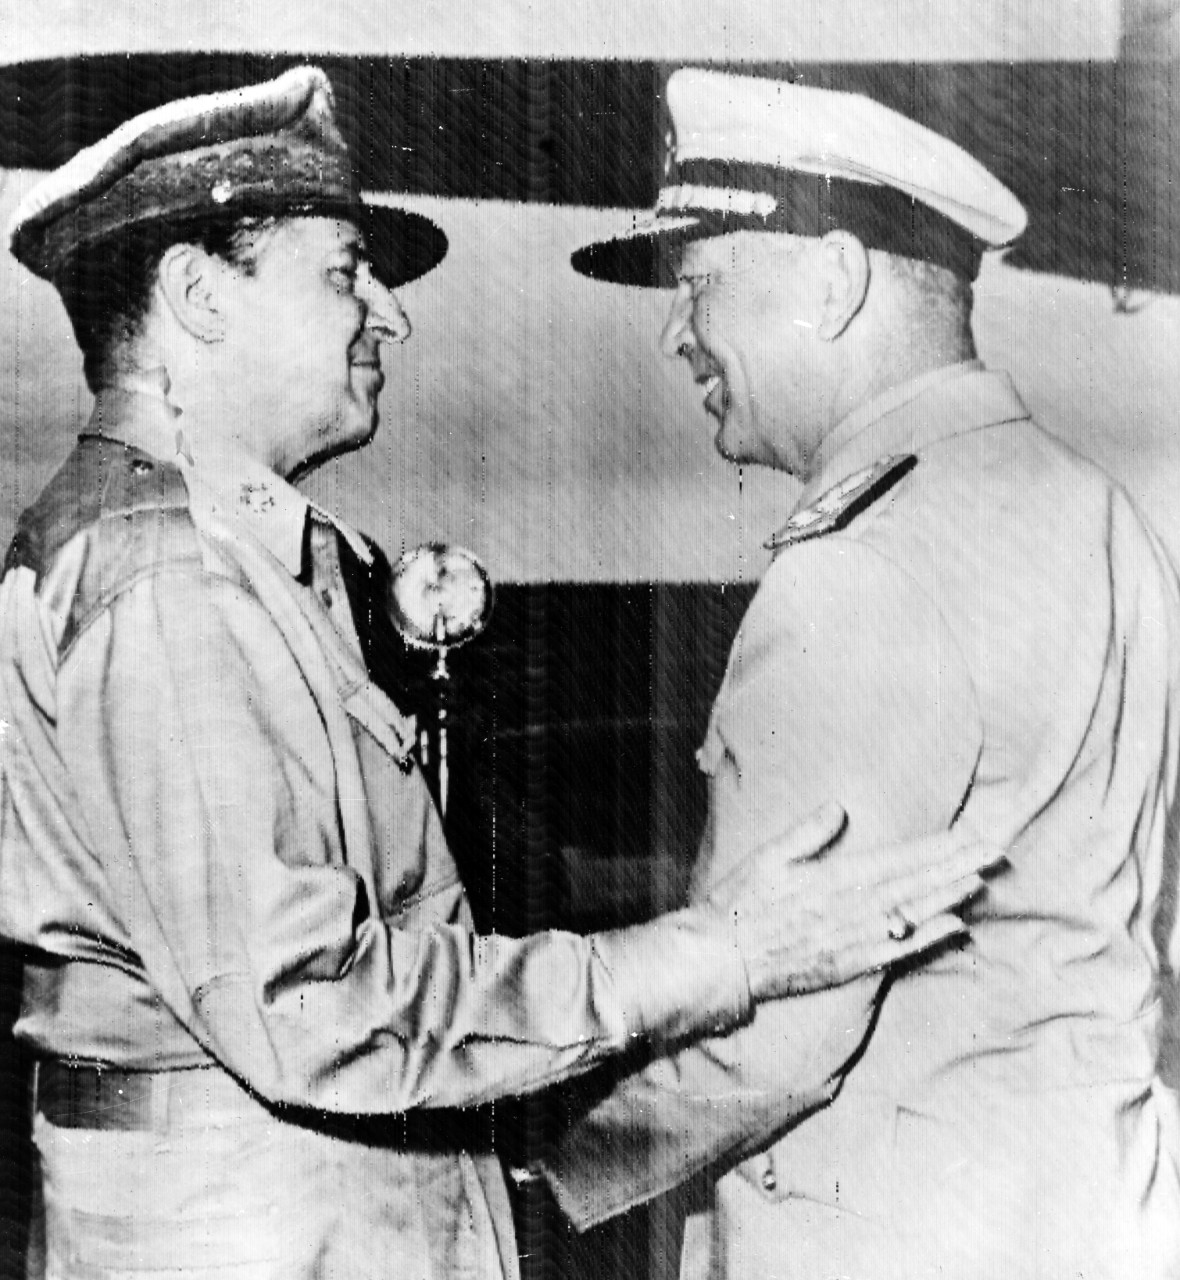 Photo #: 80-G-707908  General of the Army Douglas MacArthur